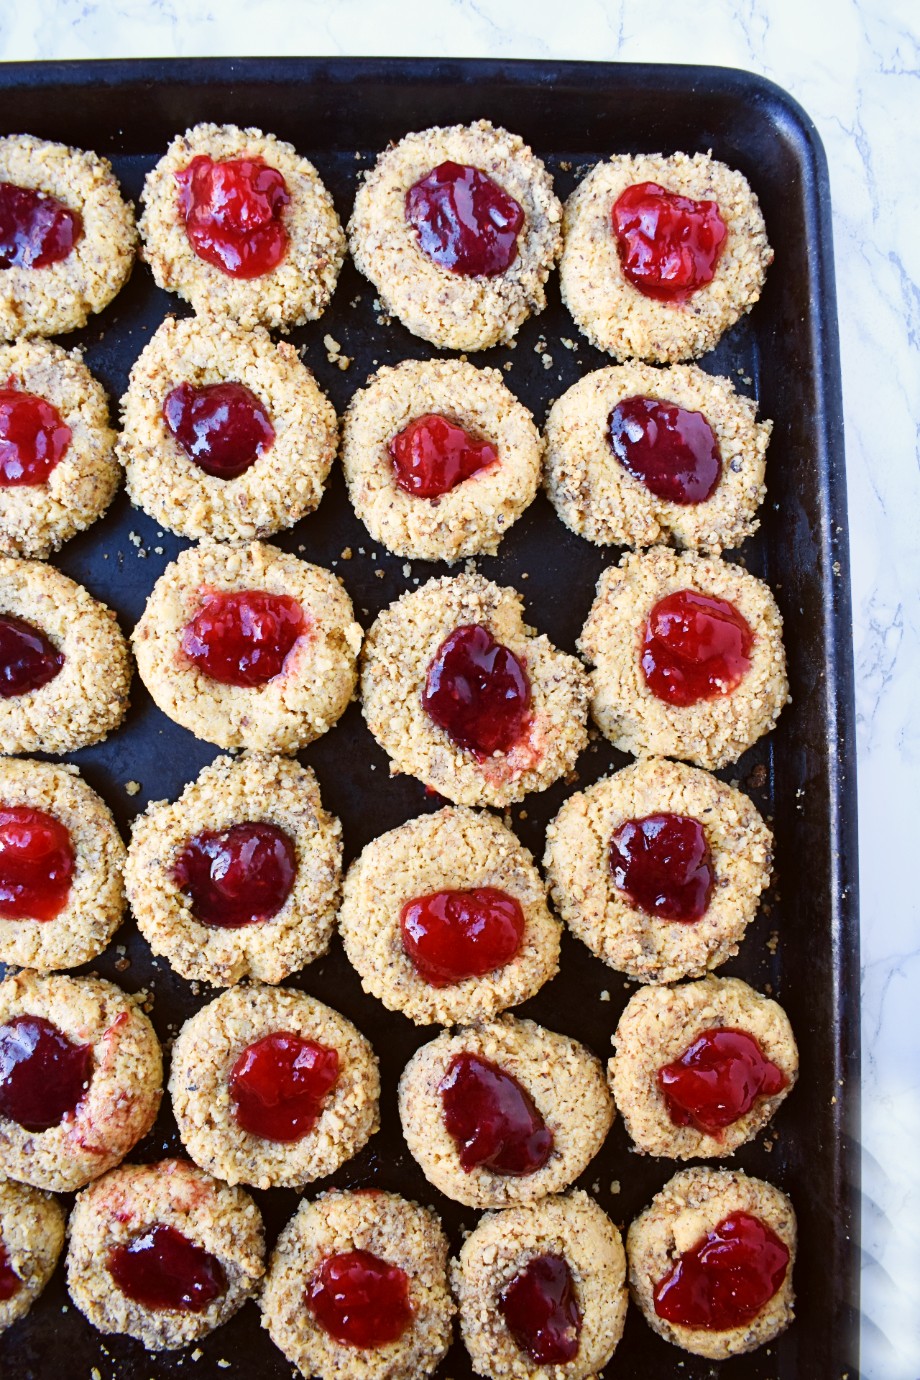 Tray of Healthy Thumbprint Cookies